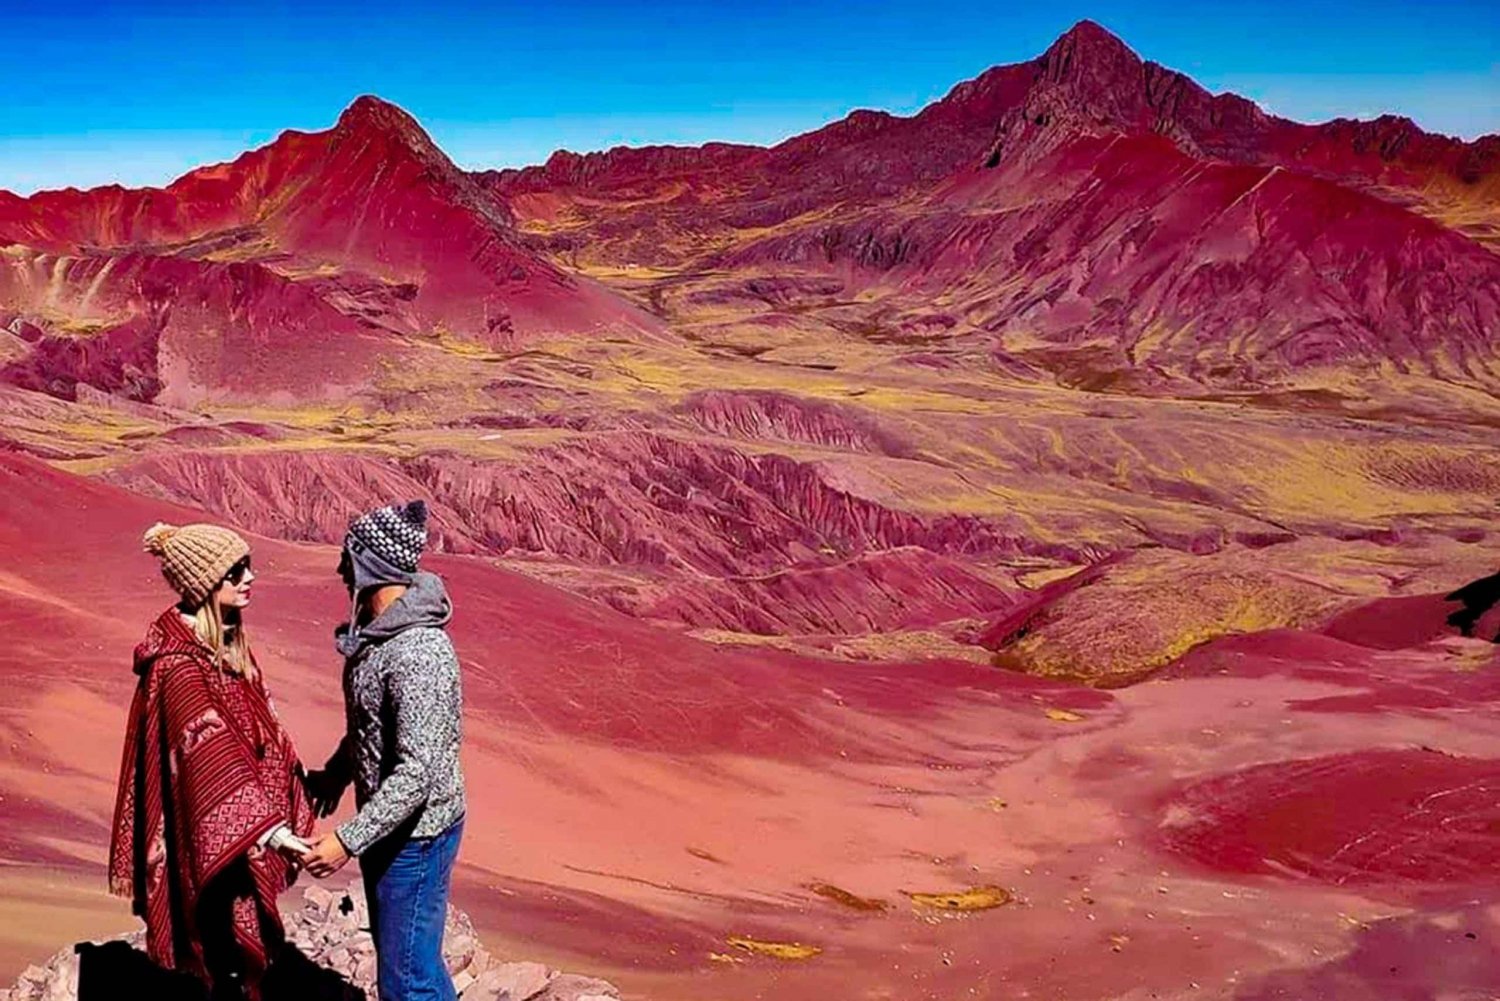 From Cusco: Rainbow Mountain & Red Valley | Hiking